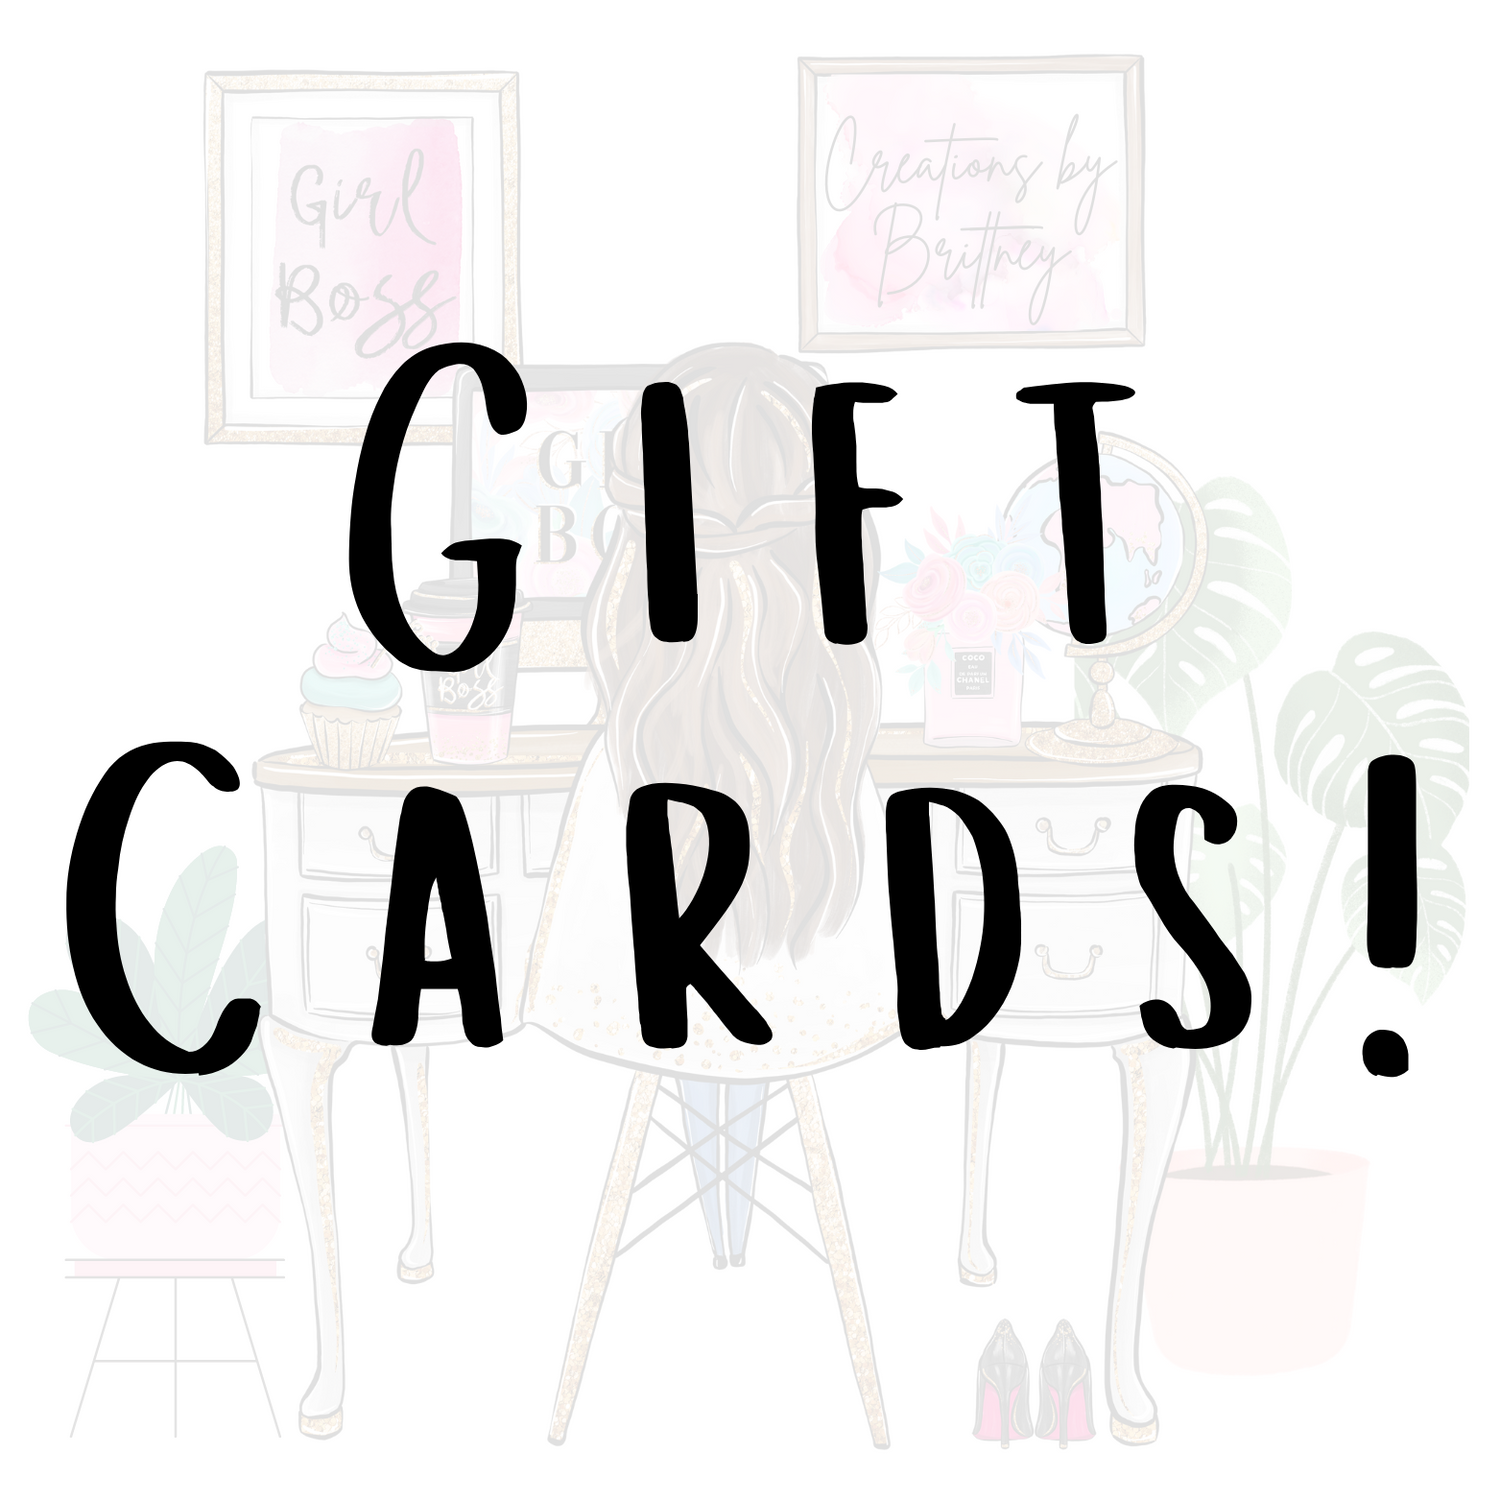 Gift Cards!